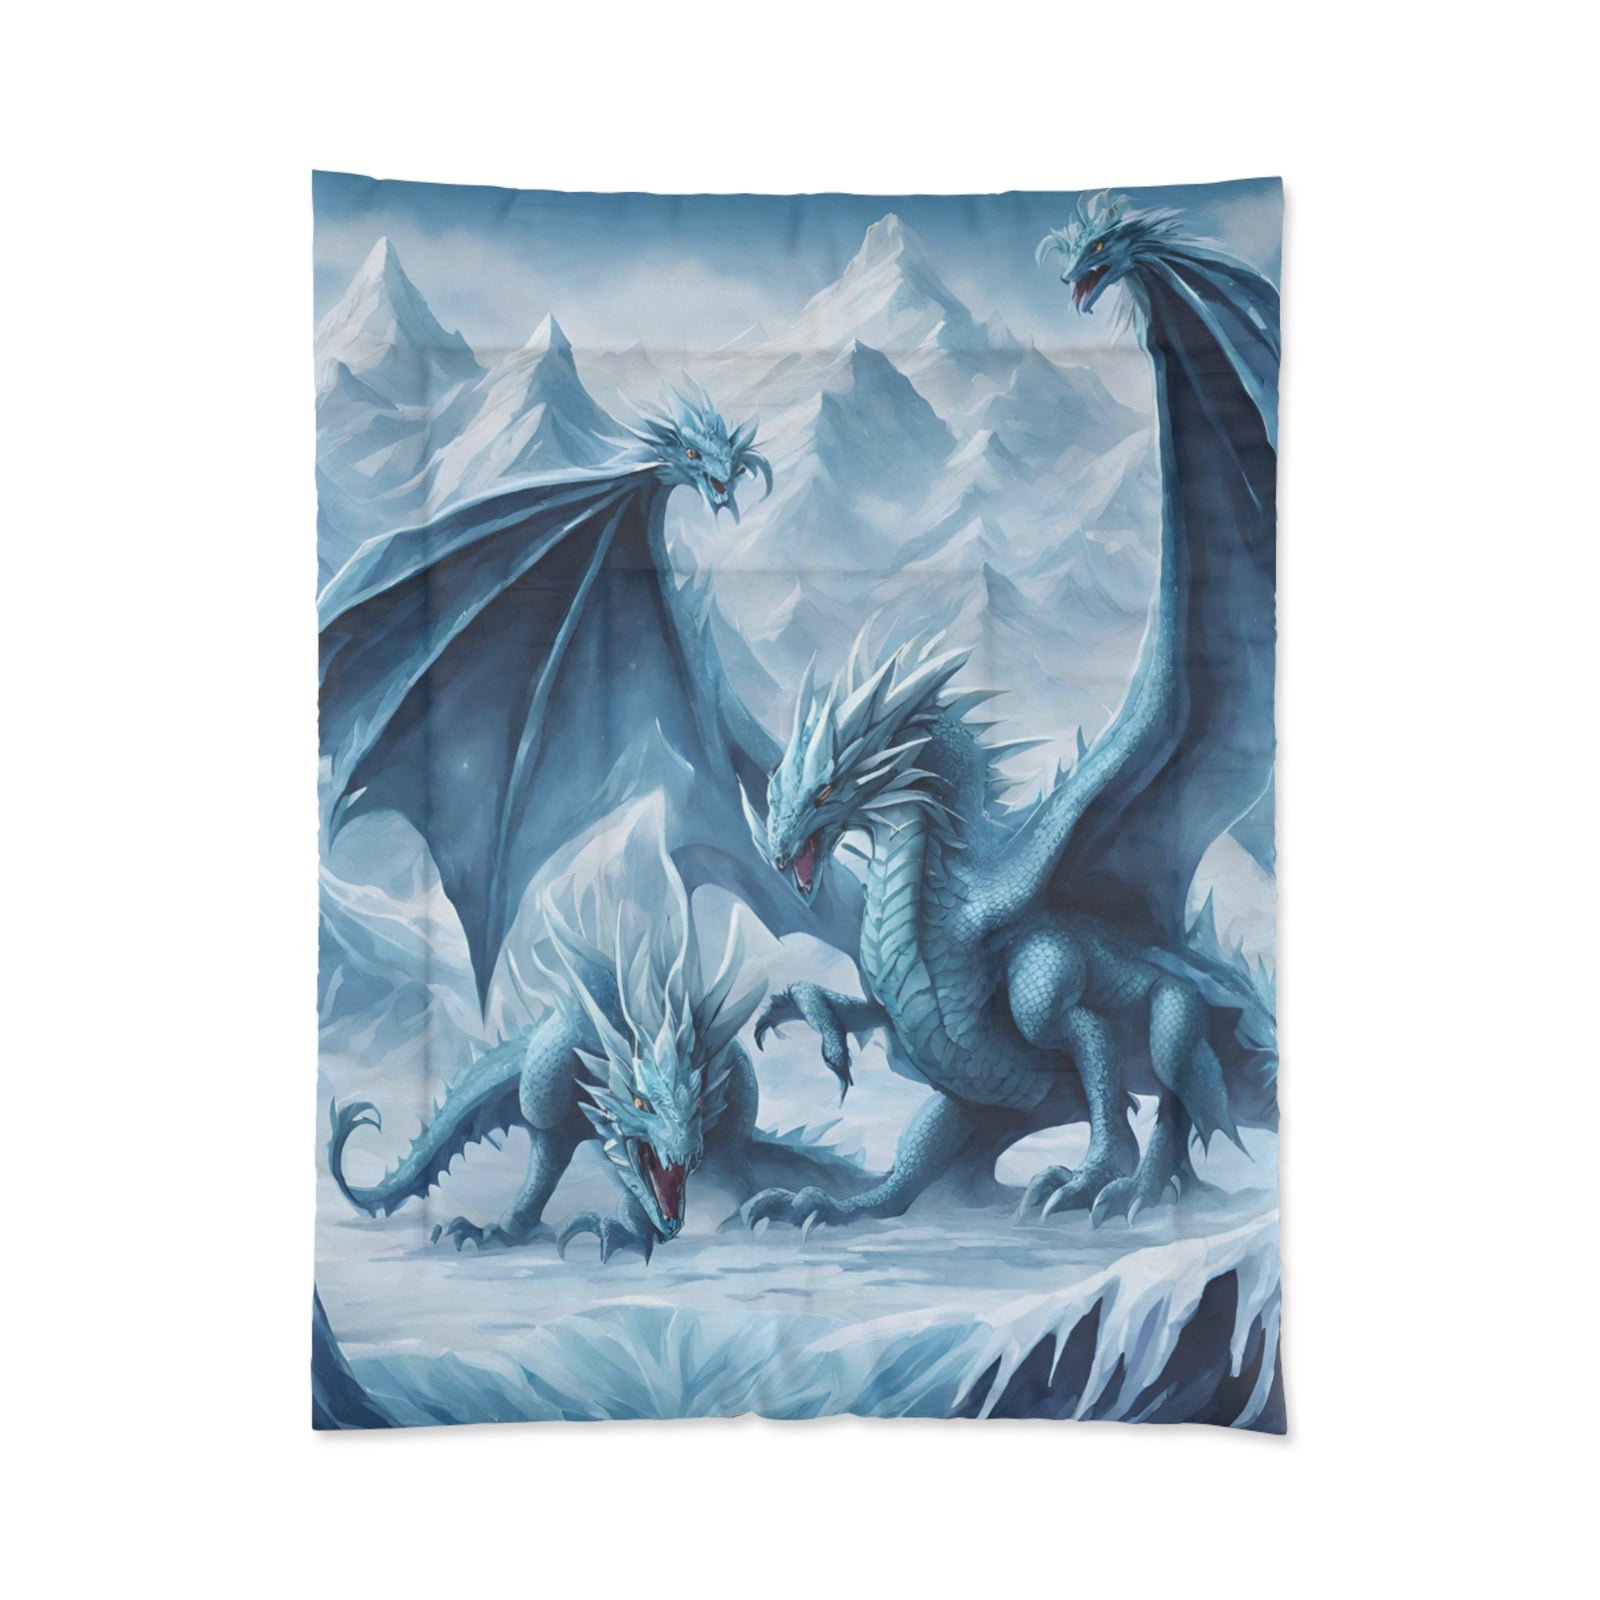 Frosty Fantasy: Ice Dragon, Snow, and Epic Battle Kids' Comforter - Transform the Bedroom into a Winter Wonderland!